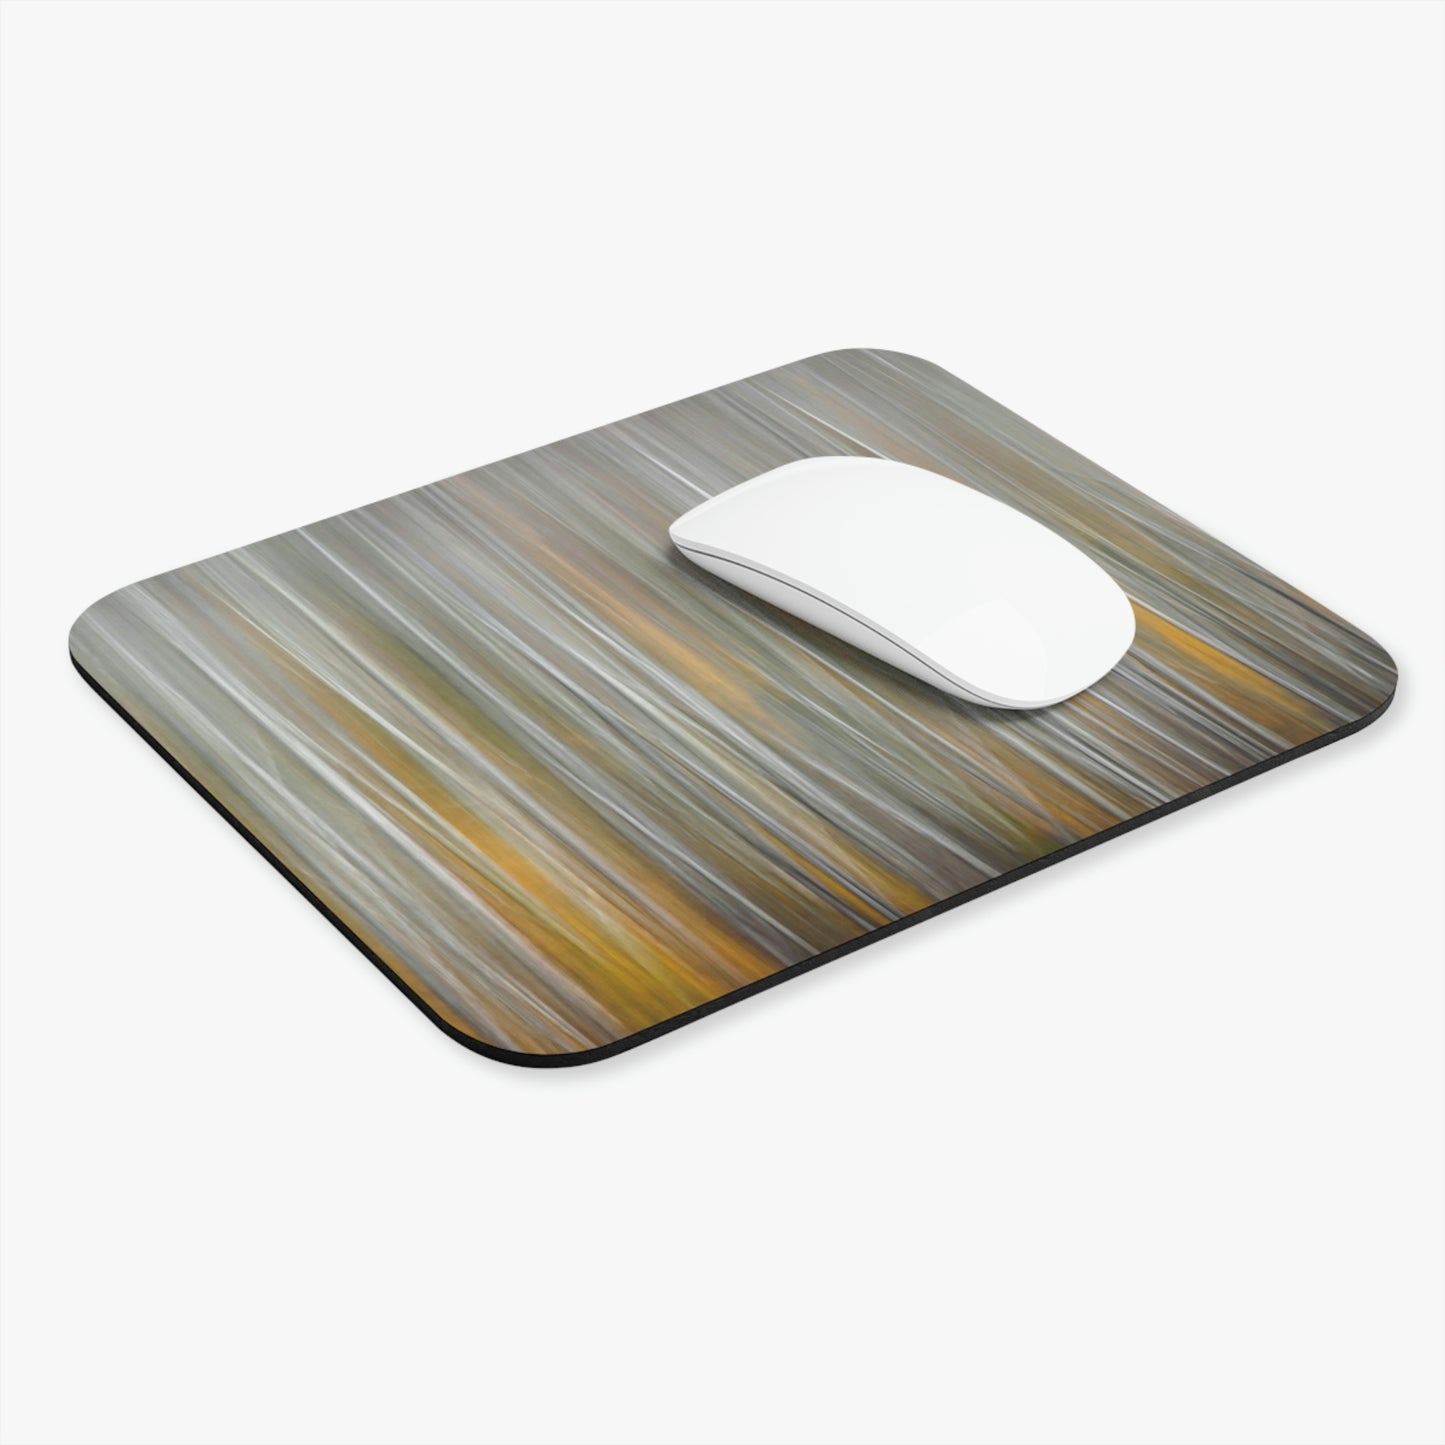 Abstract Autumn Mouse Pad